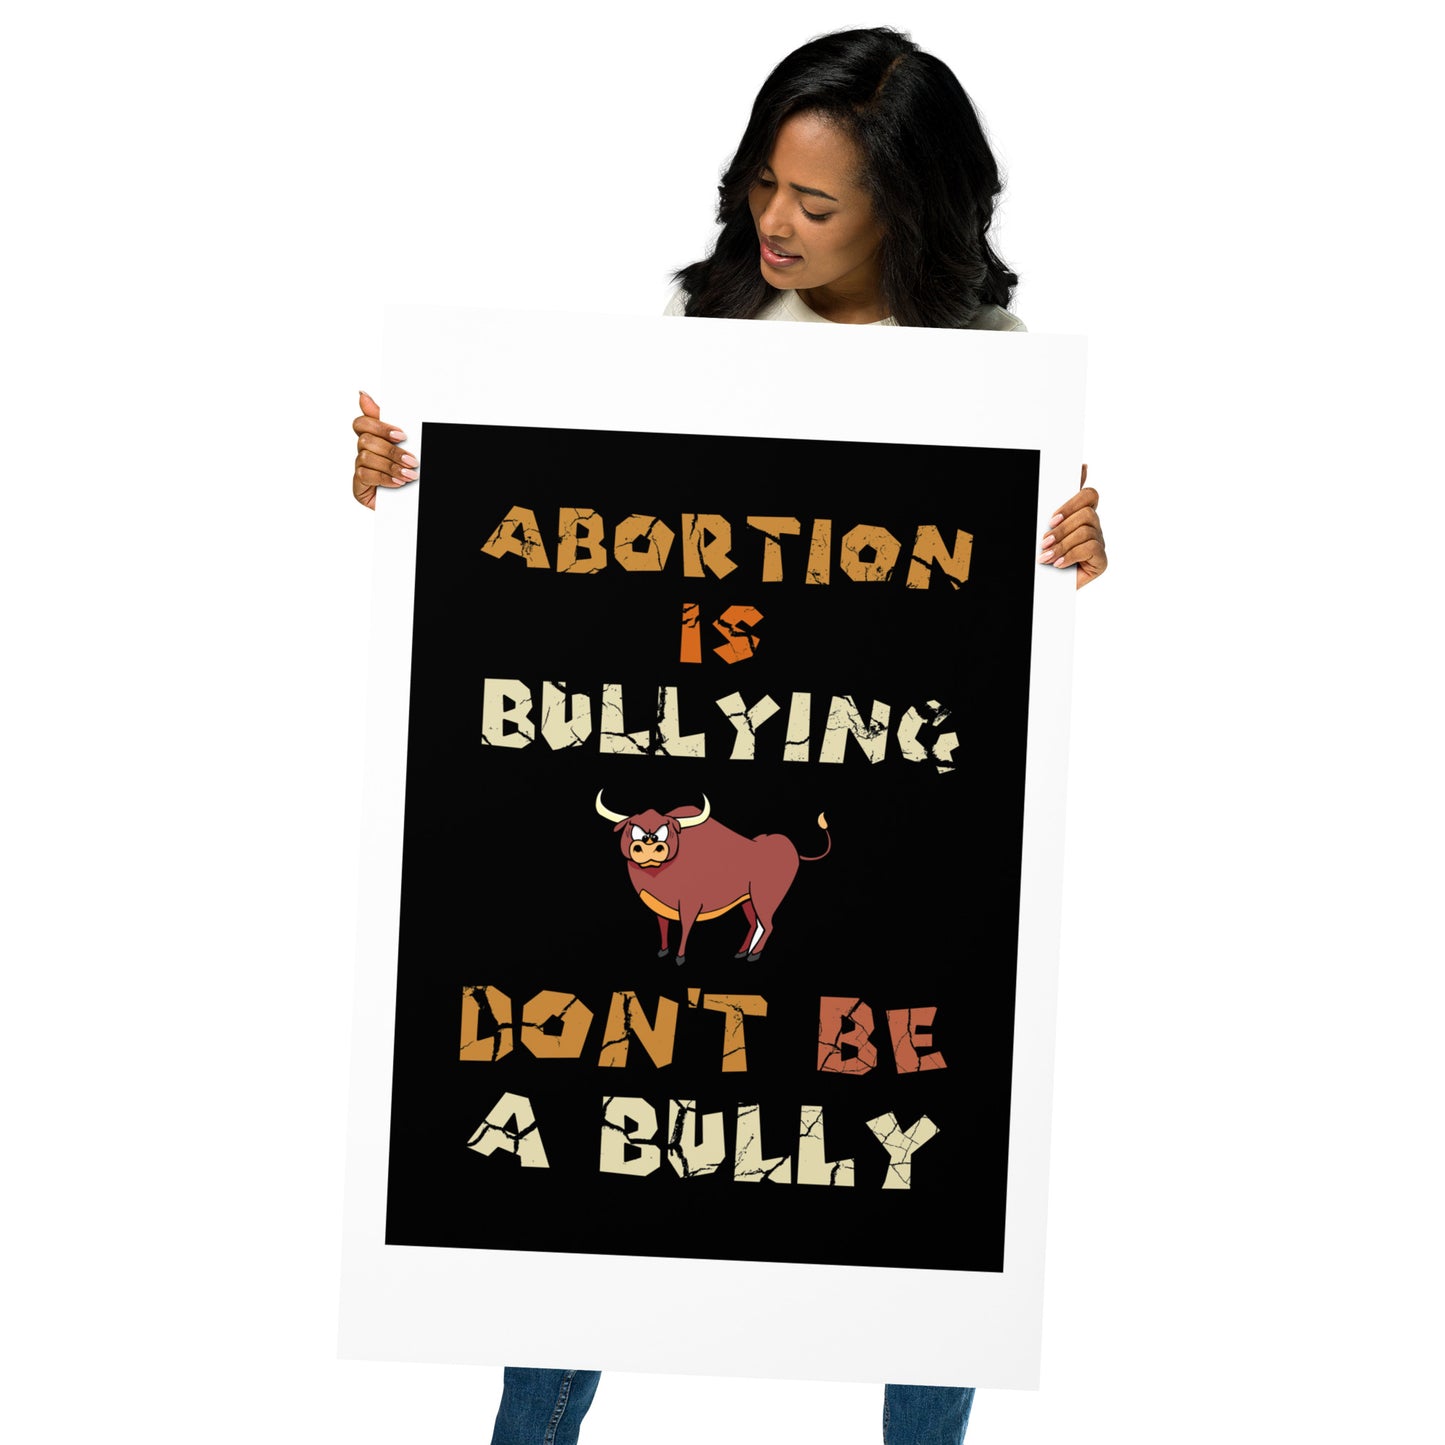 A001 Art Print - Museum Quality Giclée Print Featuring Bull-Steer Graphic with text “Abortion is Bullying. Don’t be a Bully.”